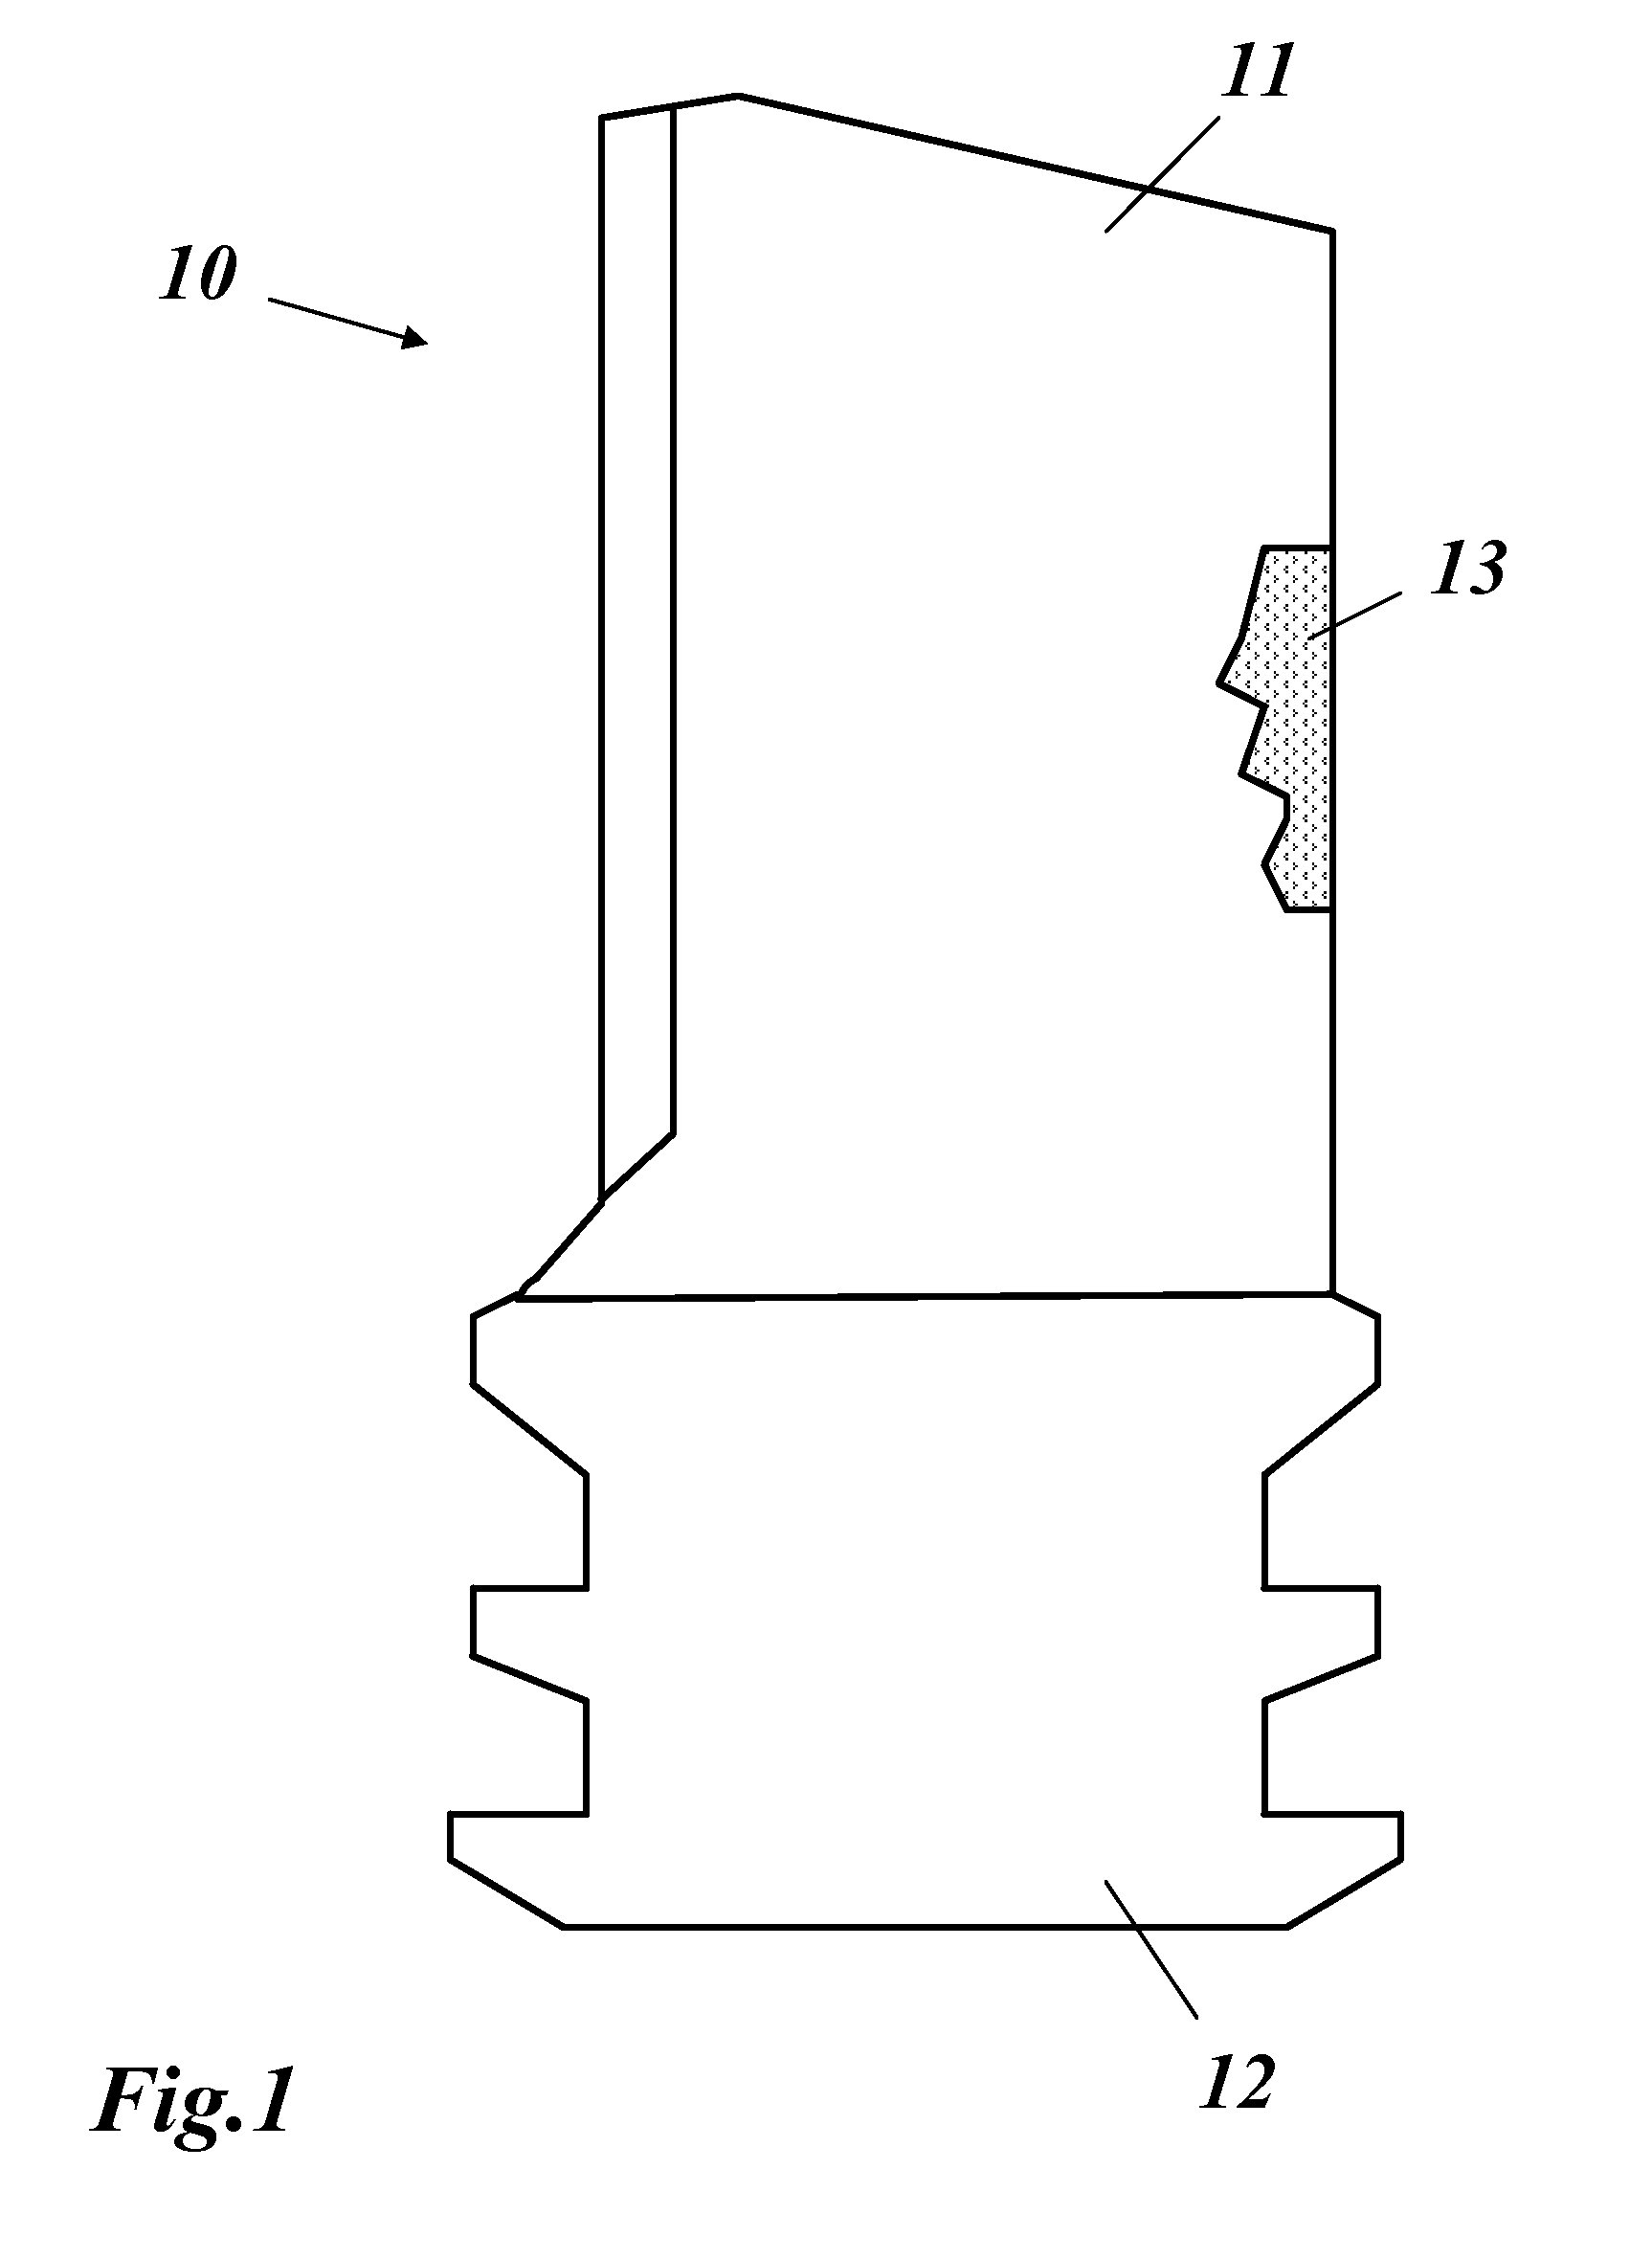 Method for repairing a gas turbine component